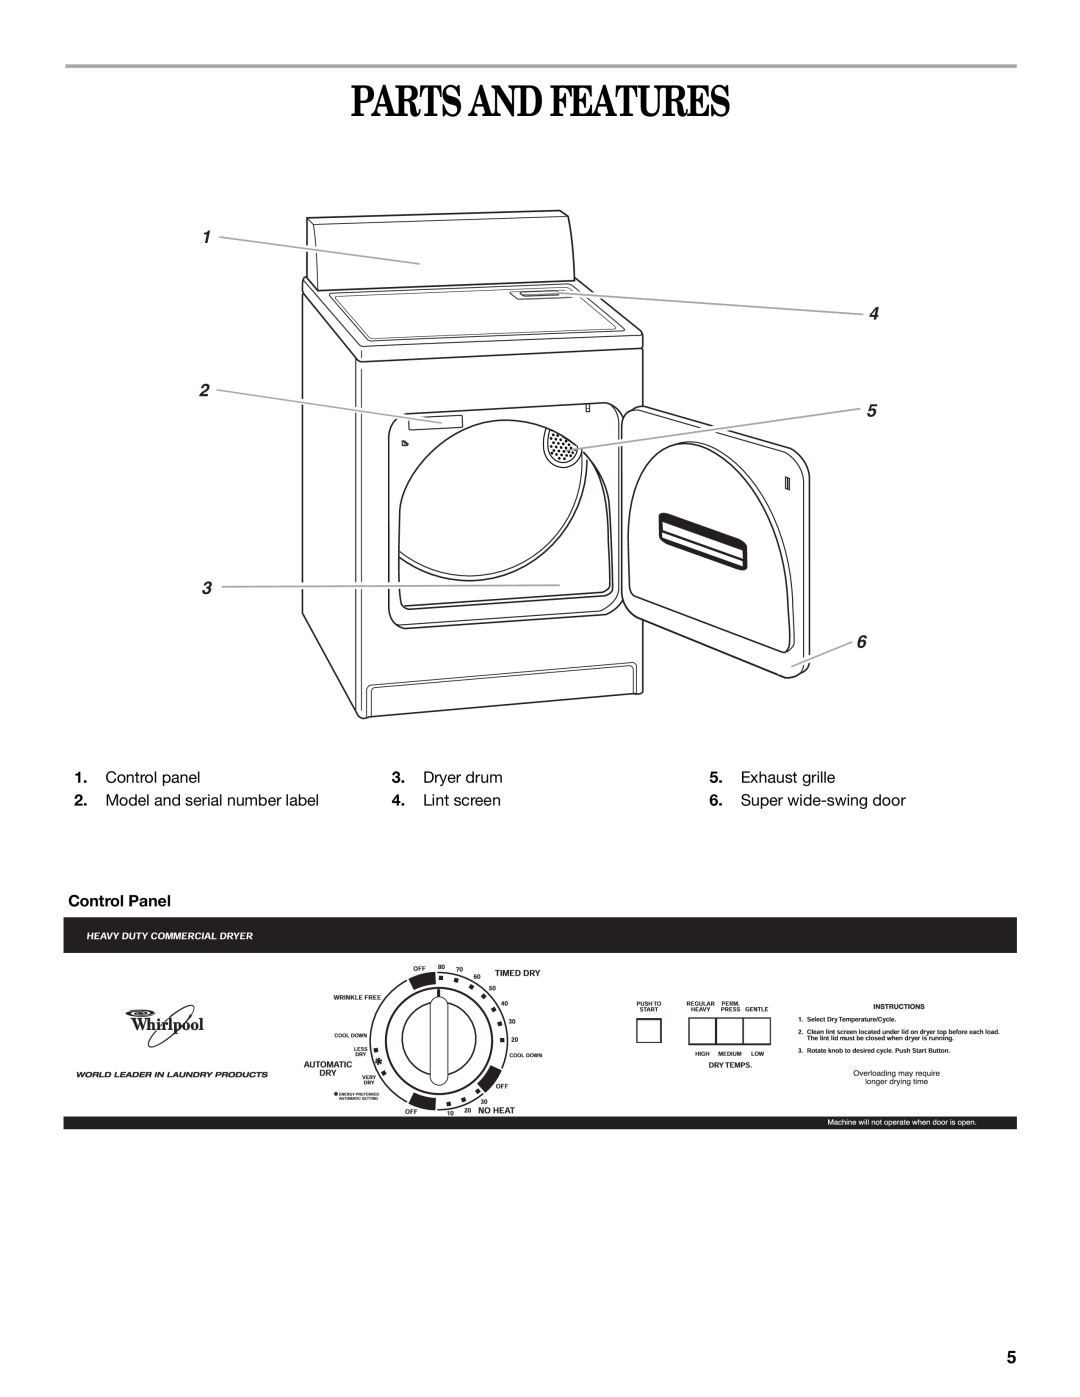 Whirlpool GCGM2991LQ0 Parts And Features, Control Panel, Dryer drum, Exhaust grille, Lint screen, Super wide-swing door 